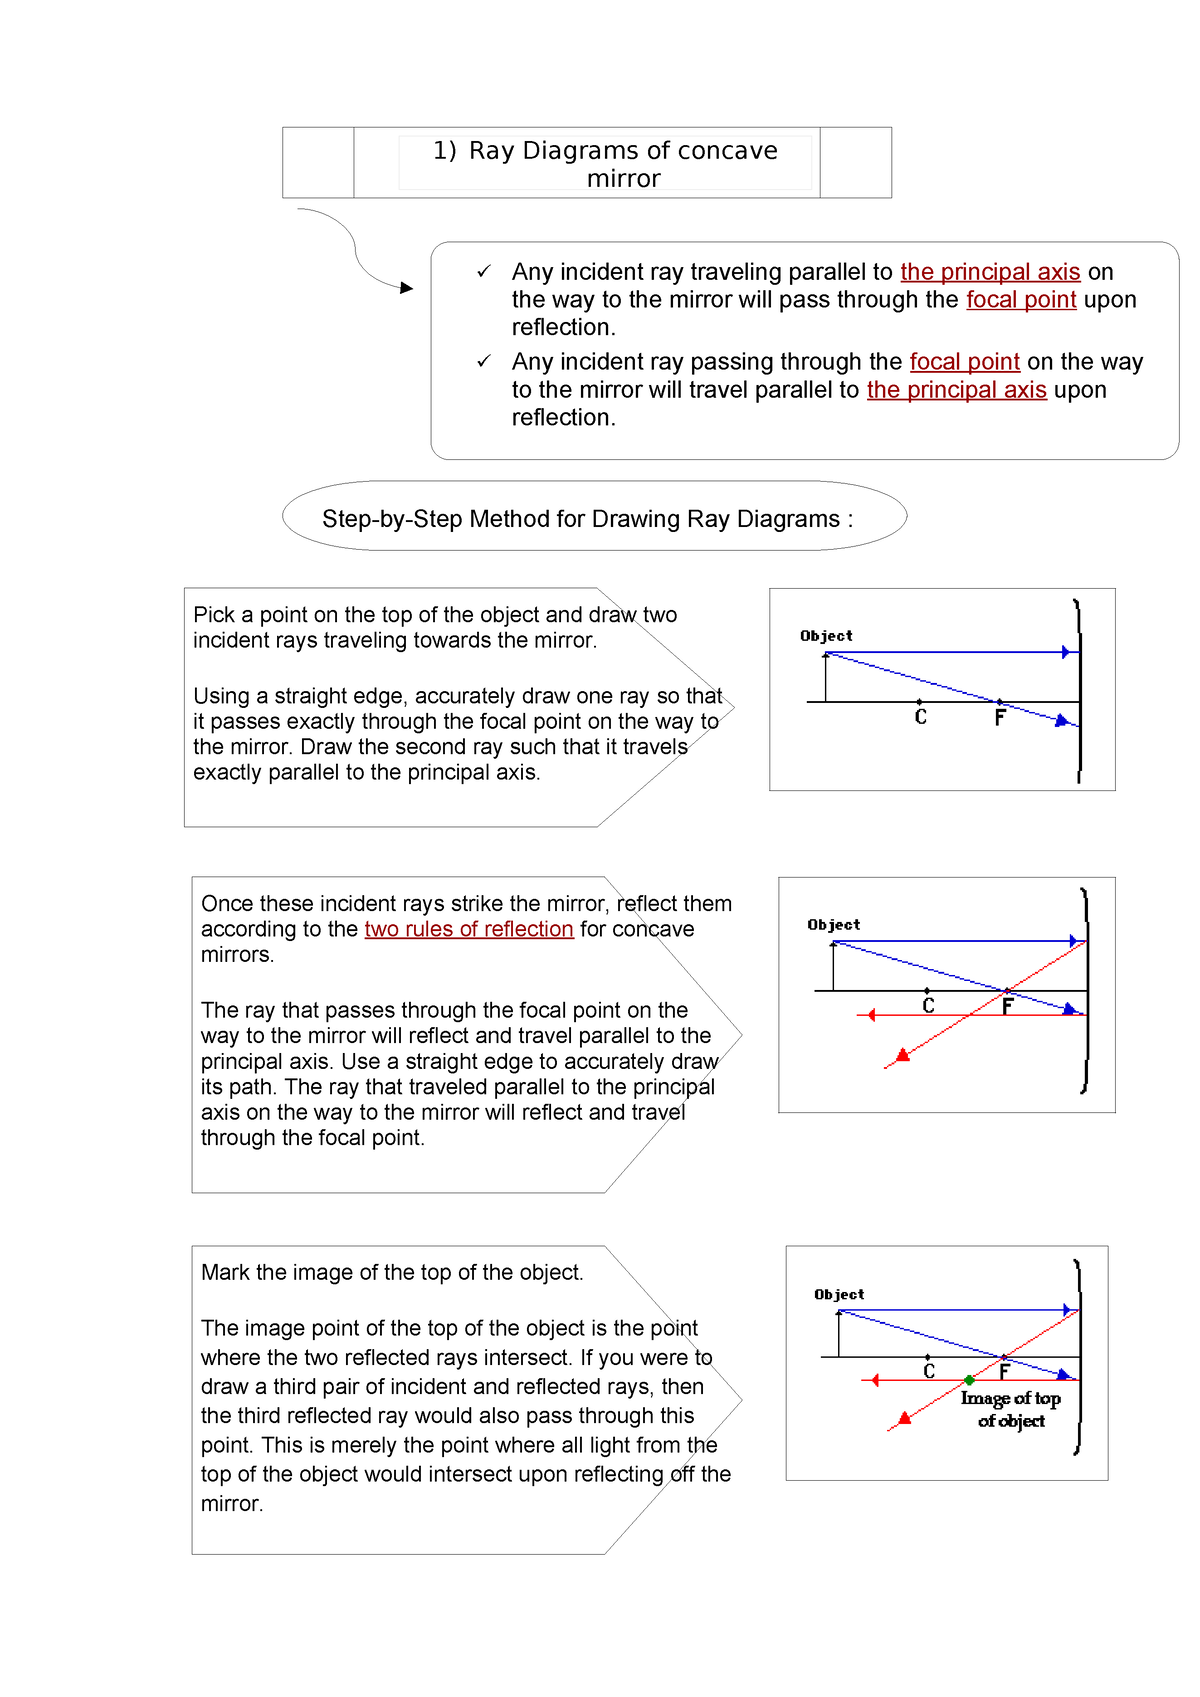 Lenses and Ray Diagrams - Student Lesson Outline | Science 8th Grade